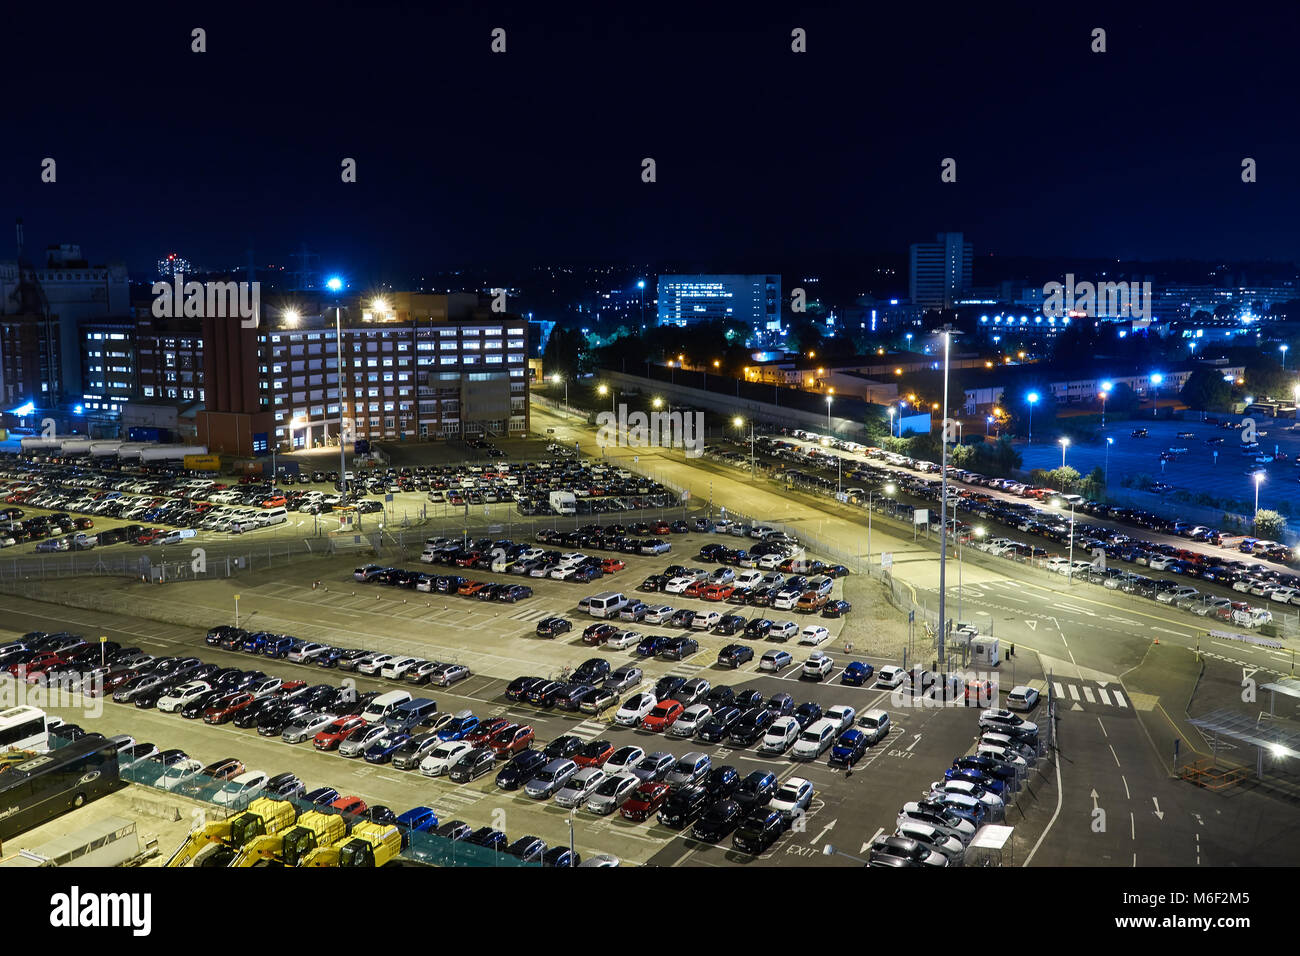 Parking in the night city. View from above. Stock Photo